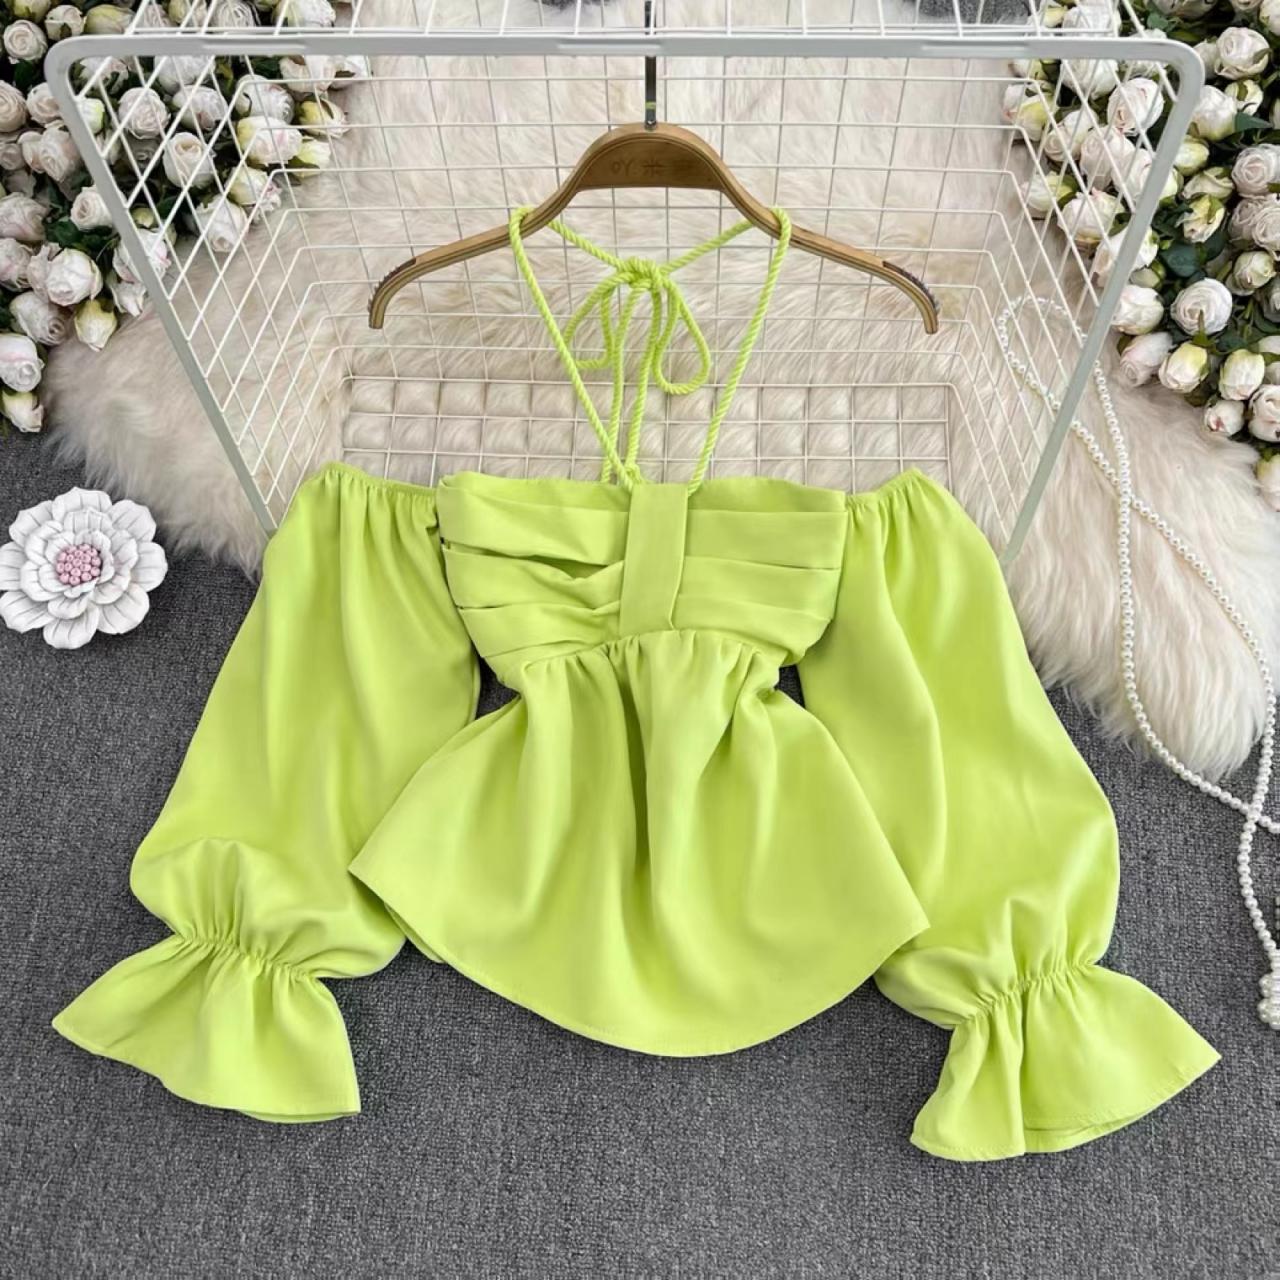 Girl, Off-the-shoulder Bubble Shirt, Peplum Cropped Top